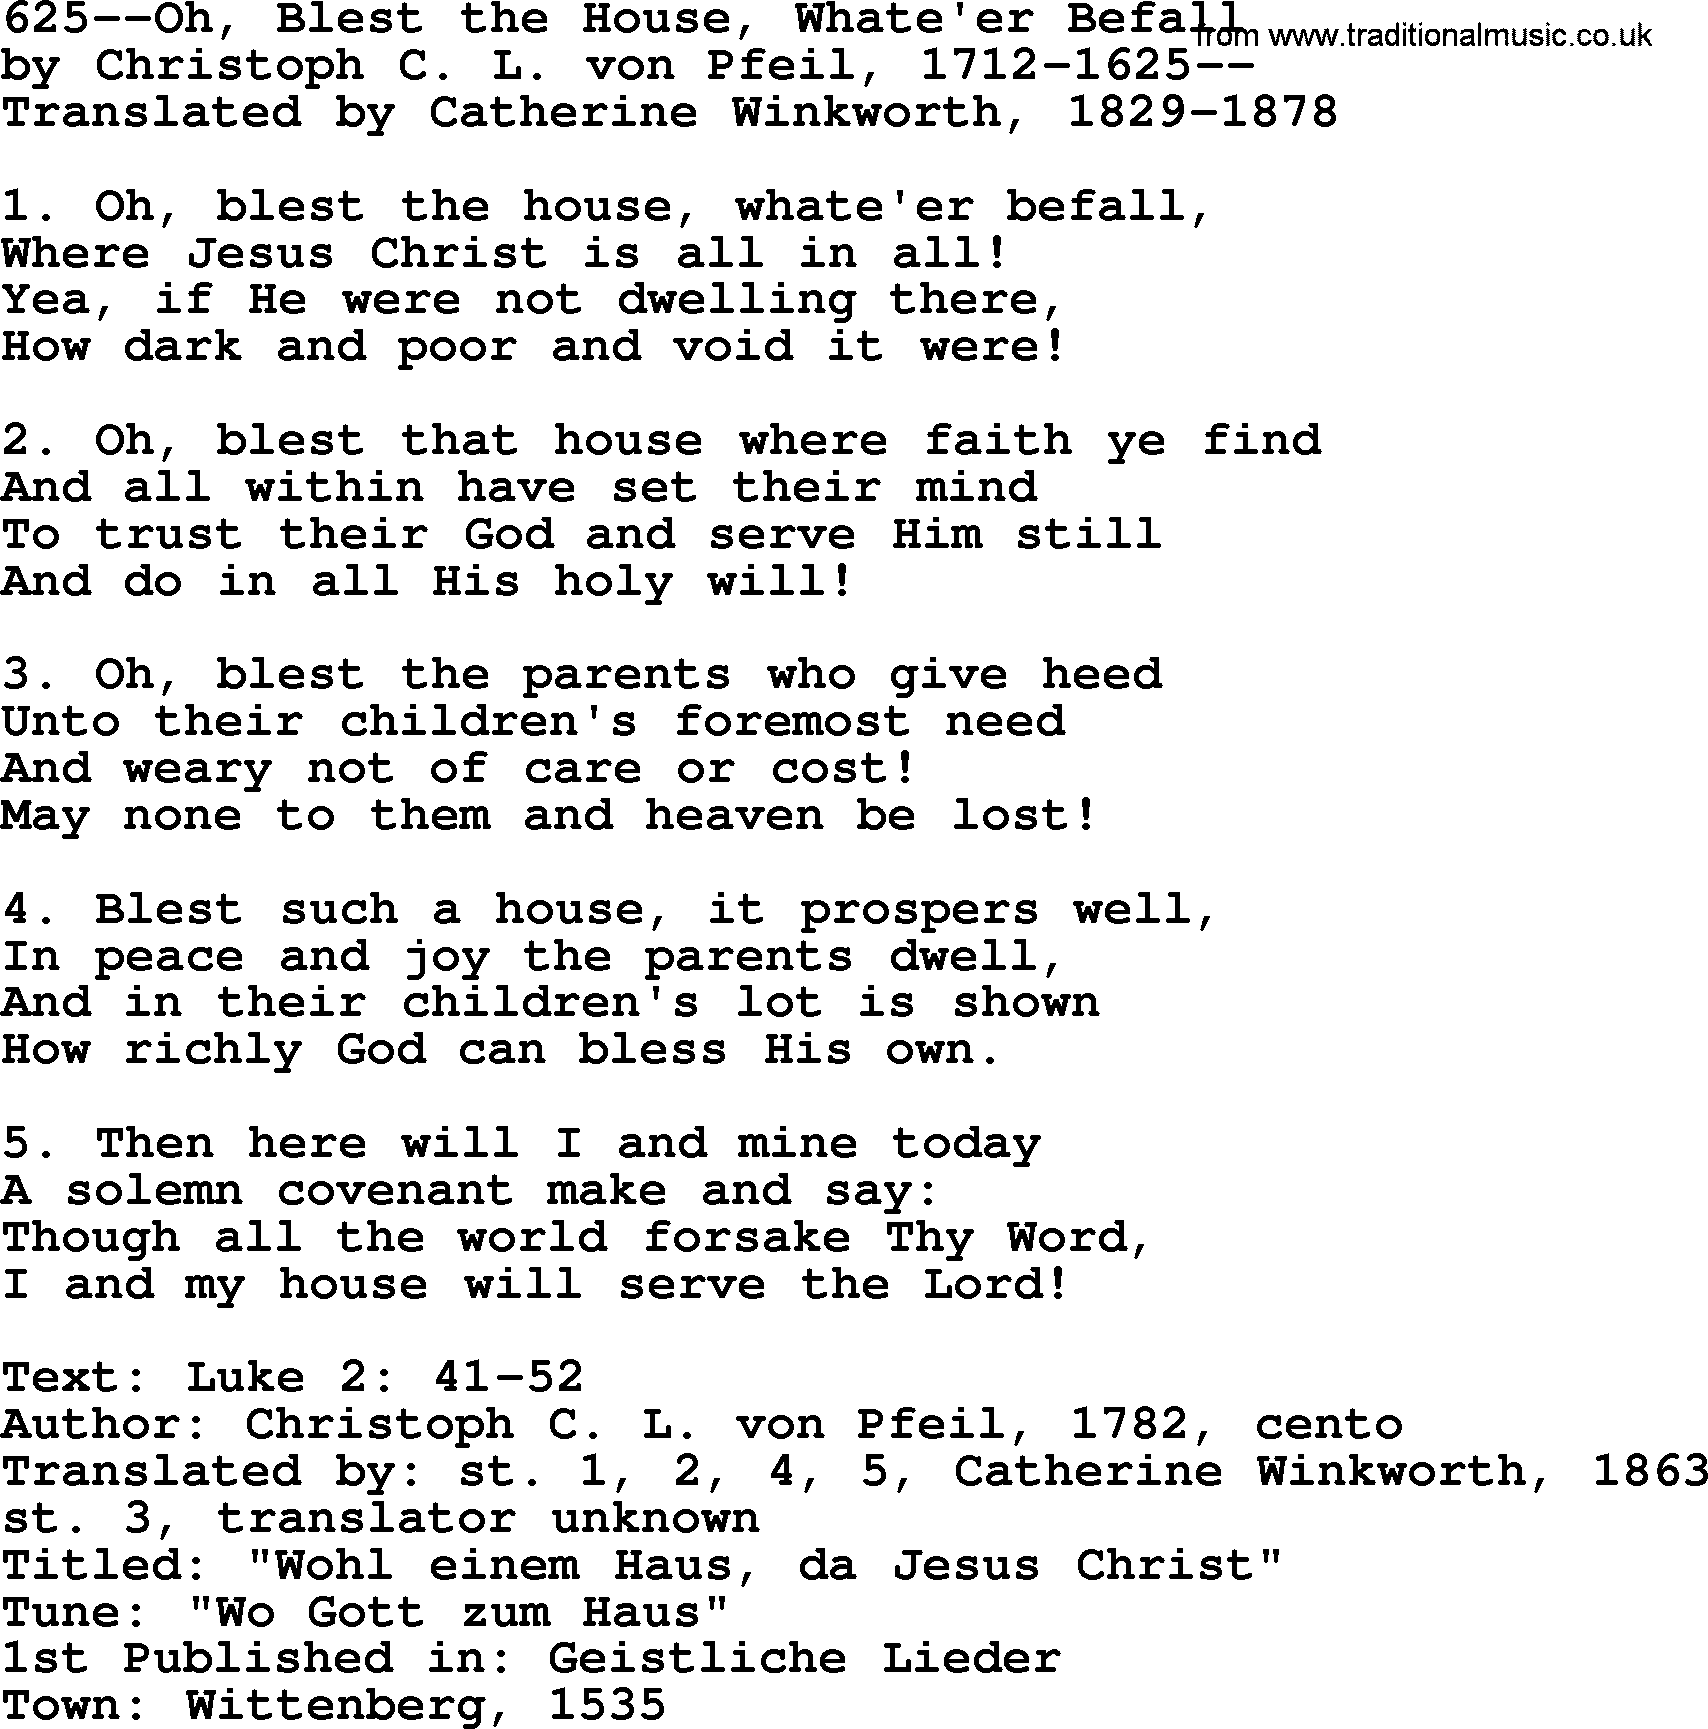 Lutheran Hymn: 625--Oh, Blest the House, Whate'er Befall.txt lyrics with PDF